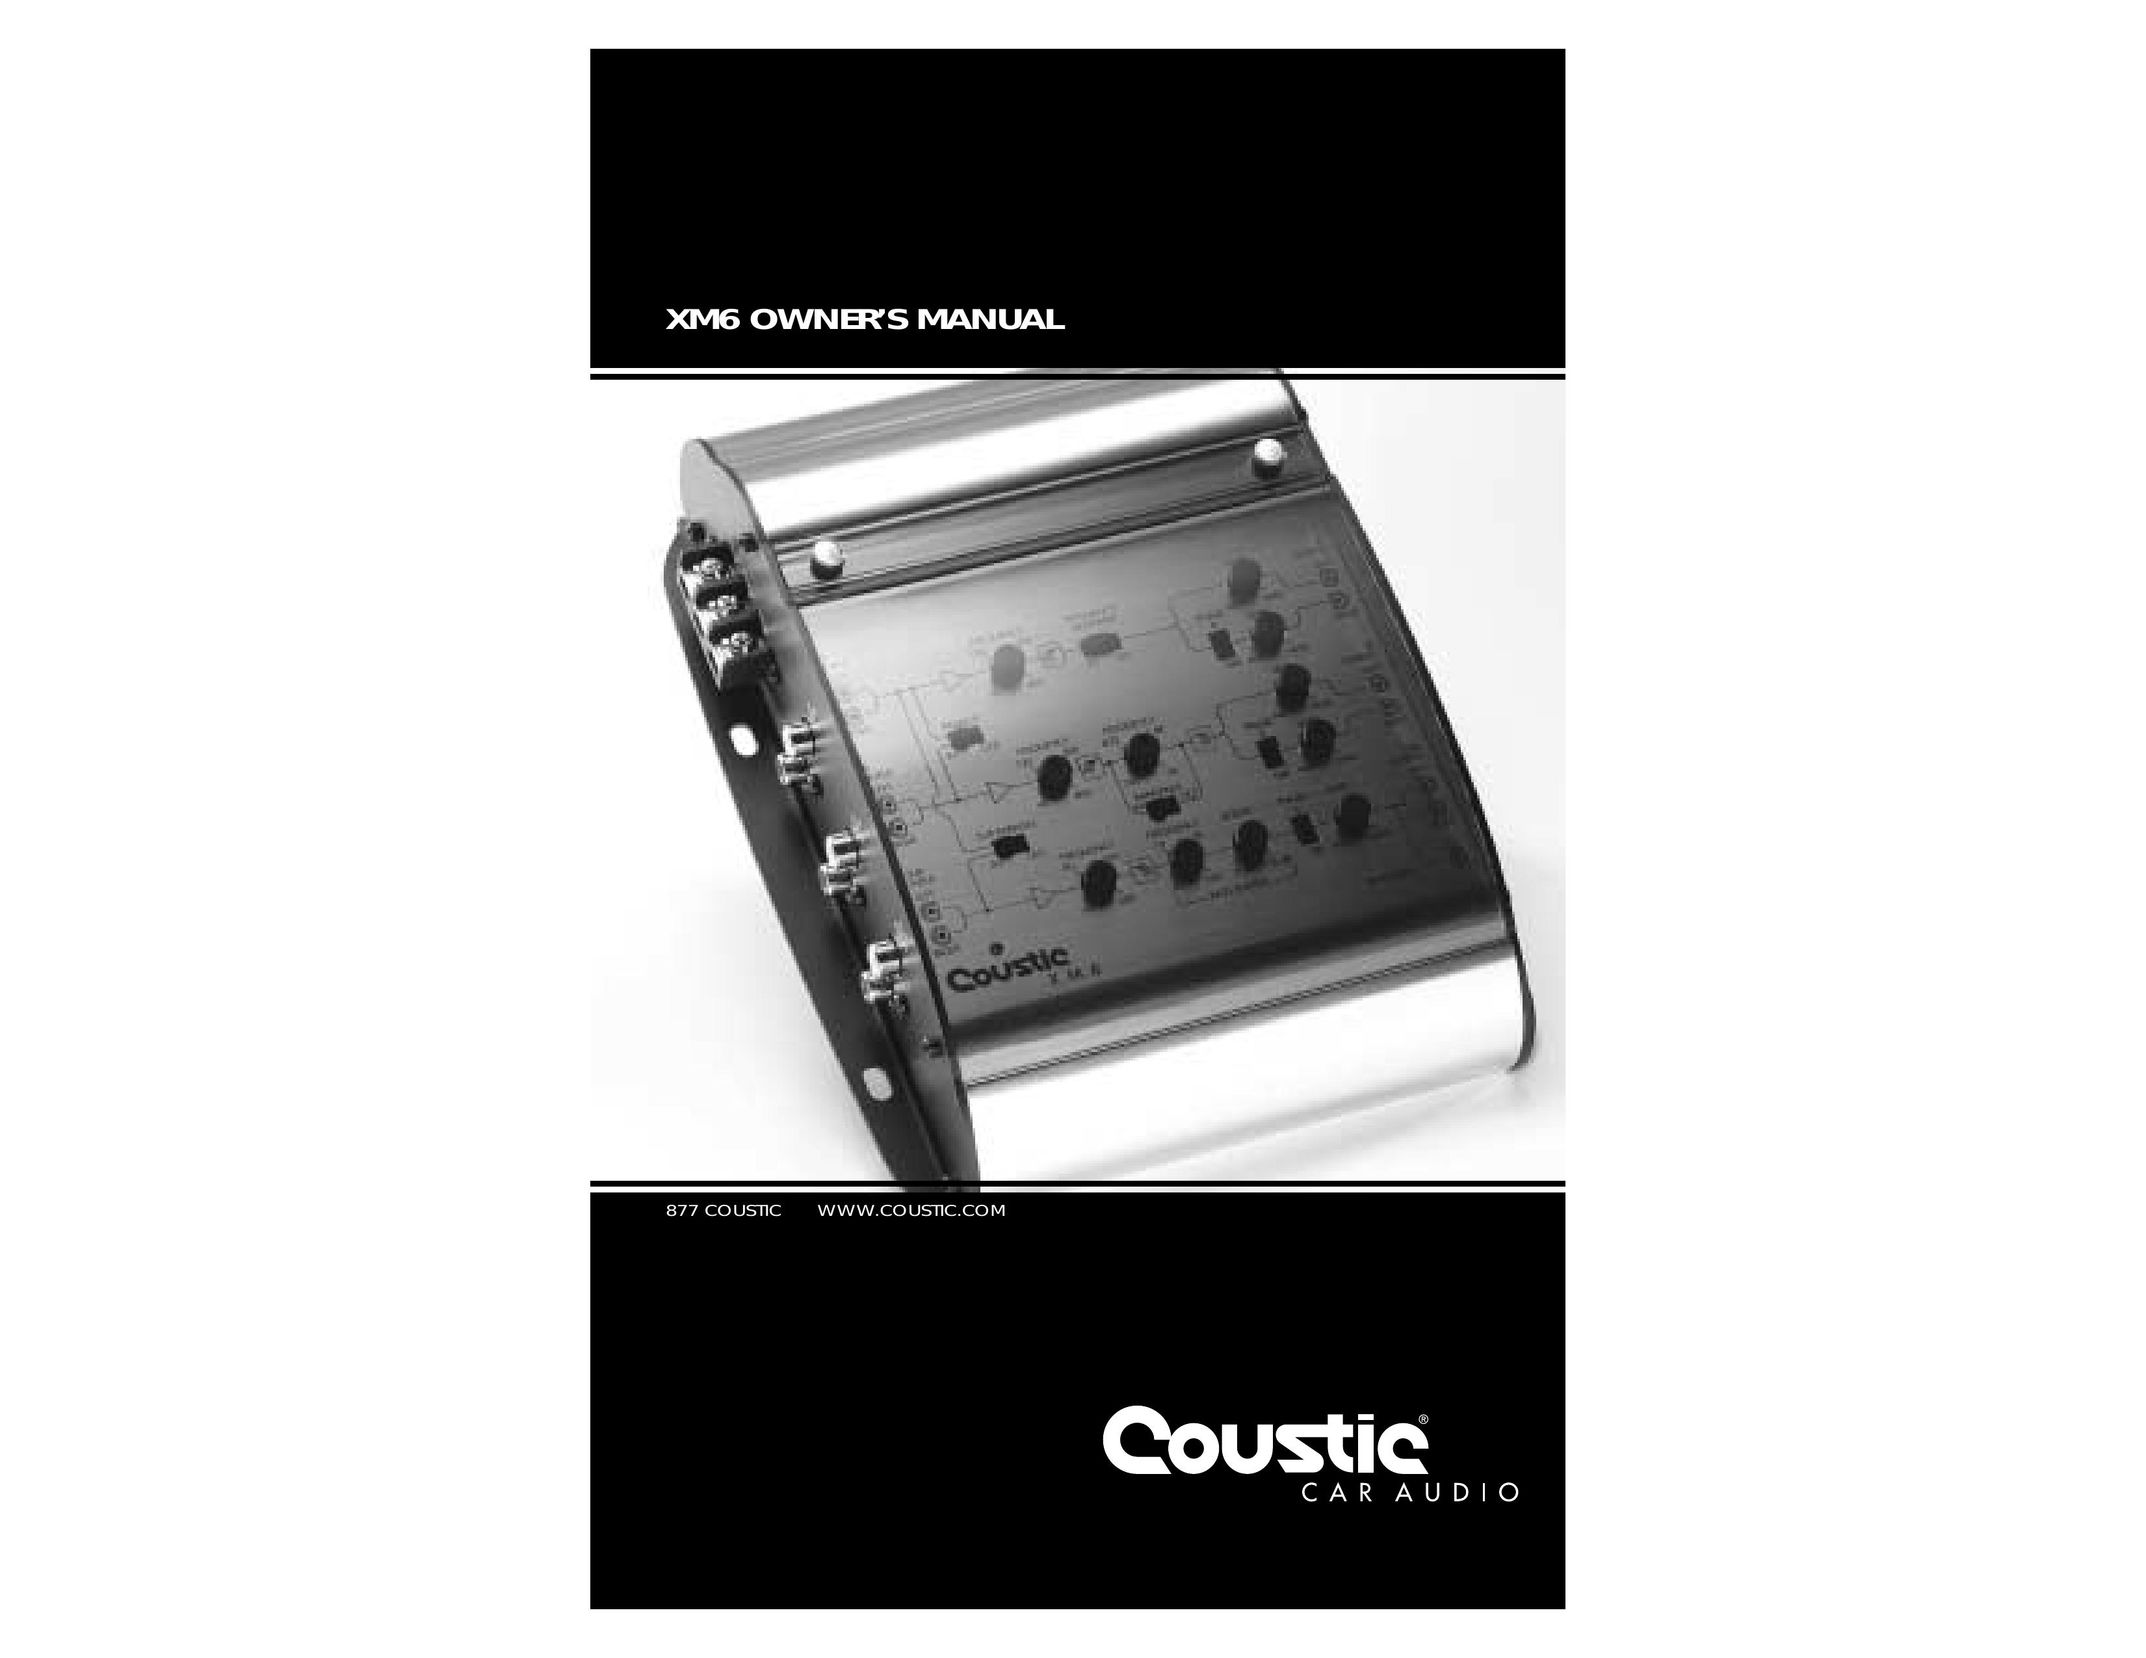 Coustic XM6 Car Stereo System User Manual